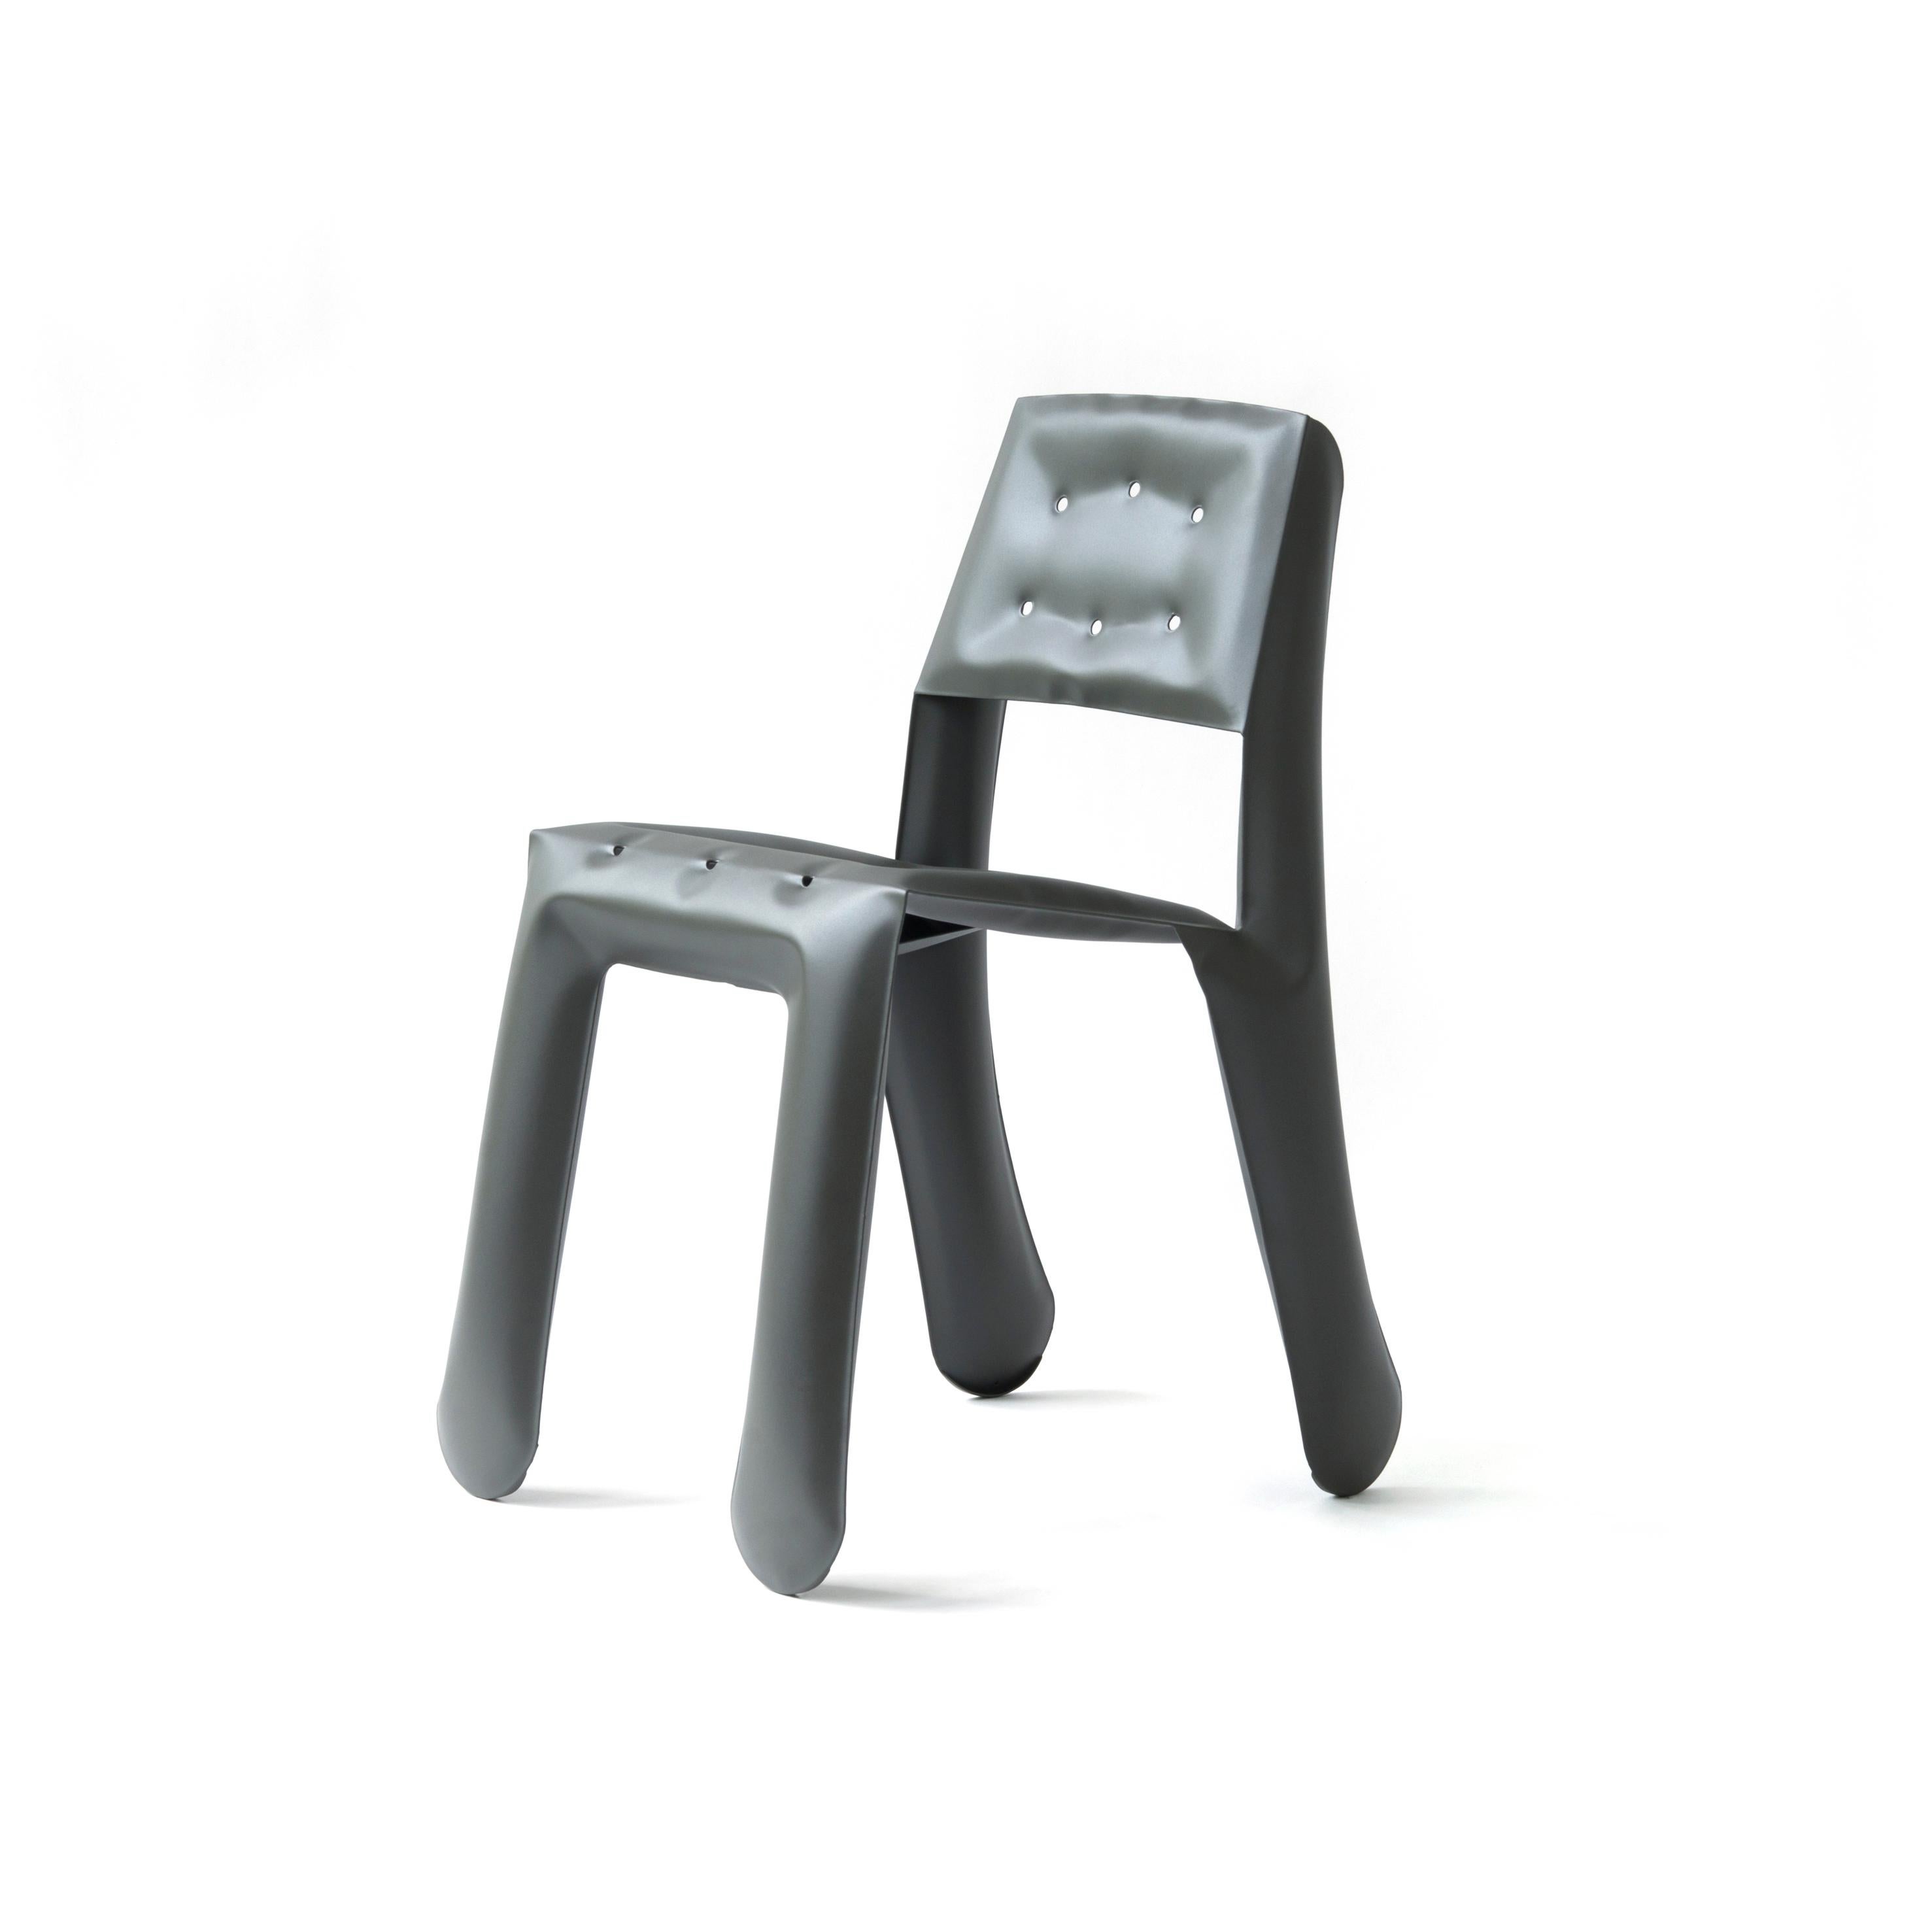 Umbra Grey Aluminum Chippensteel 0.5 Sculptural Chair by Zieta
Dimensions: D 58 x W 46 x H 80 cm 
Material: Aluminum. 
Finish: Powder-coated. Matt finish. 
Available in colors: white matt, beige, black, blue-gray, graphite, moss-gray, and